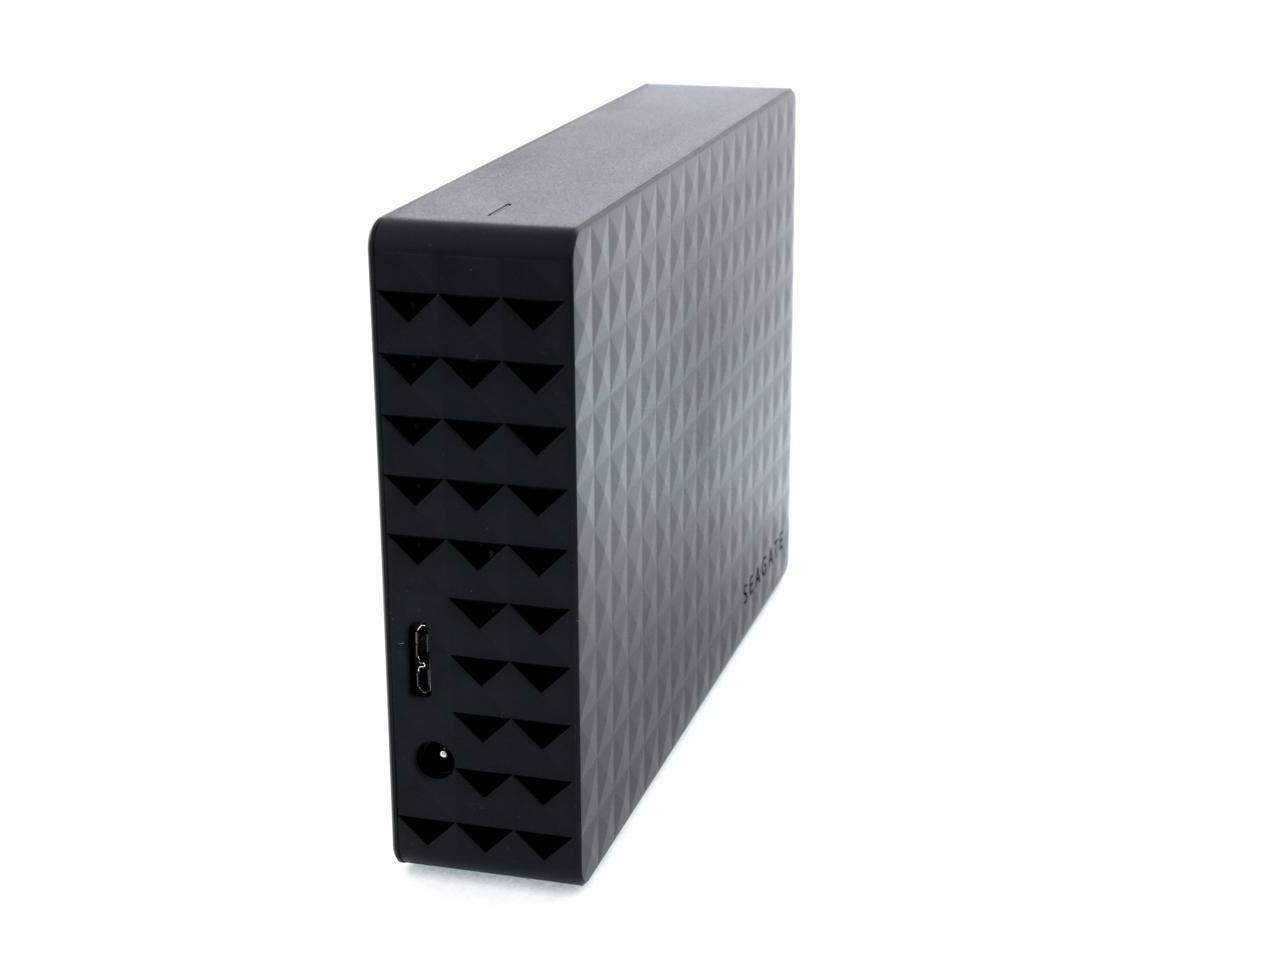 Seagate Expansion 3TB Desktop External Drive USB 3.0 for XBOX One And Computer 